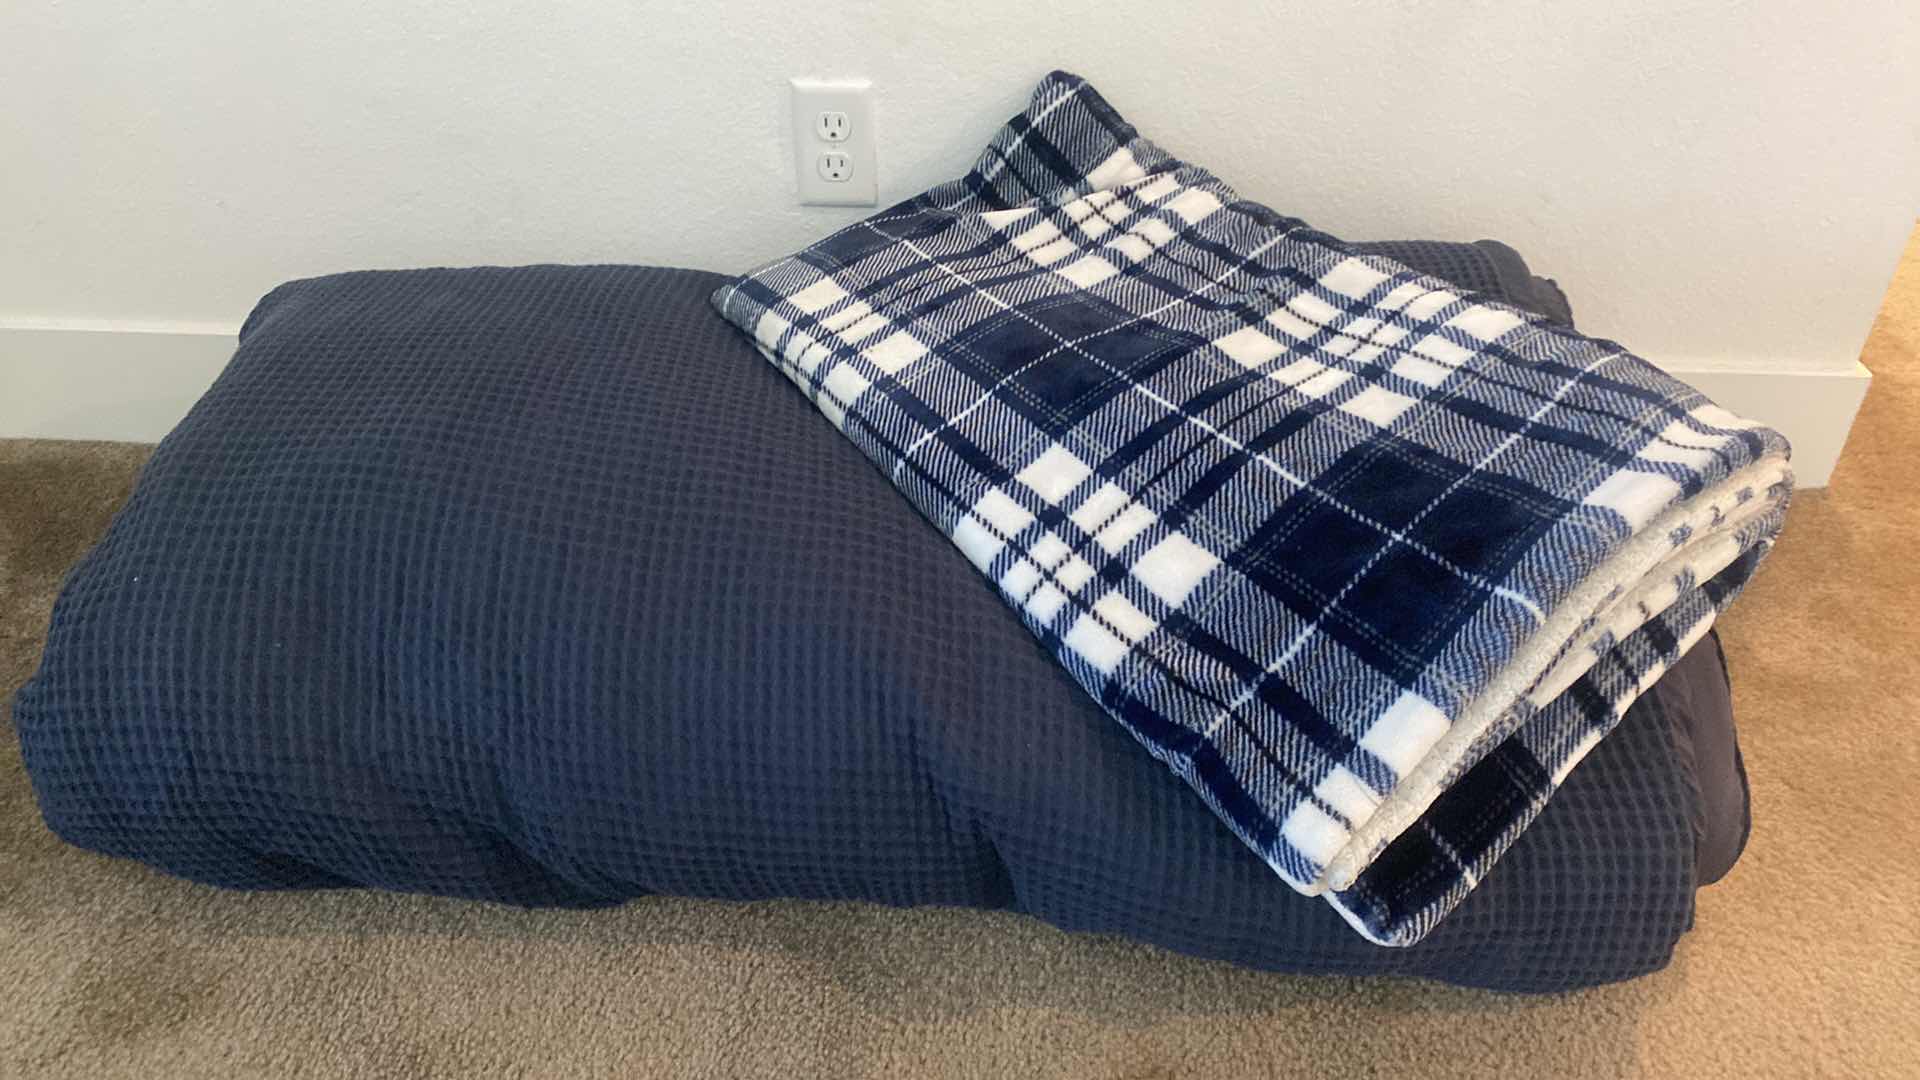 Photo 1 of NAVY BLUE KING COMFORTER AND PLAID BLANKET